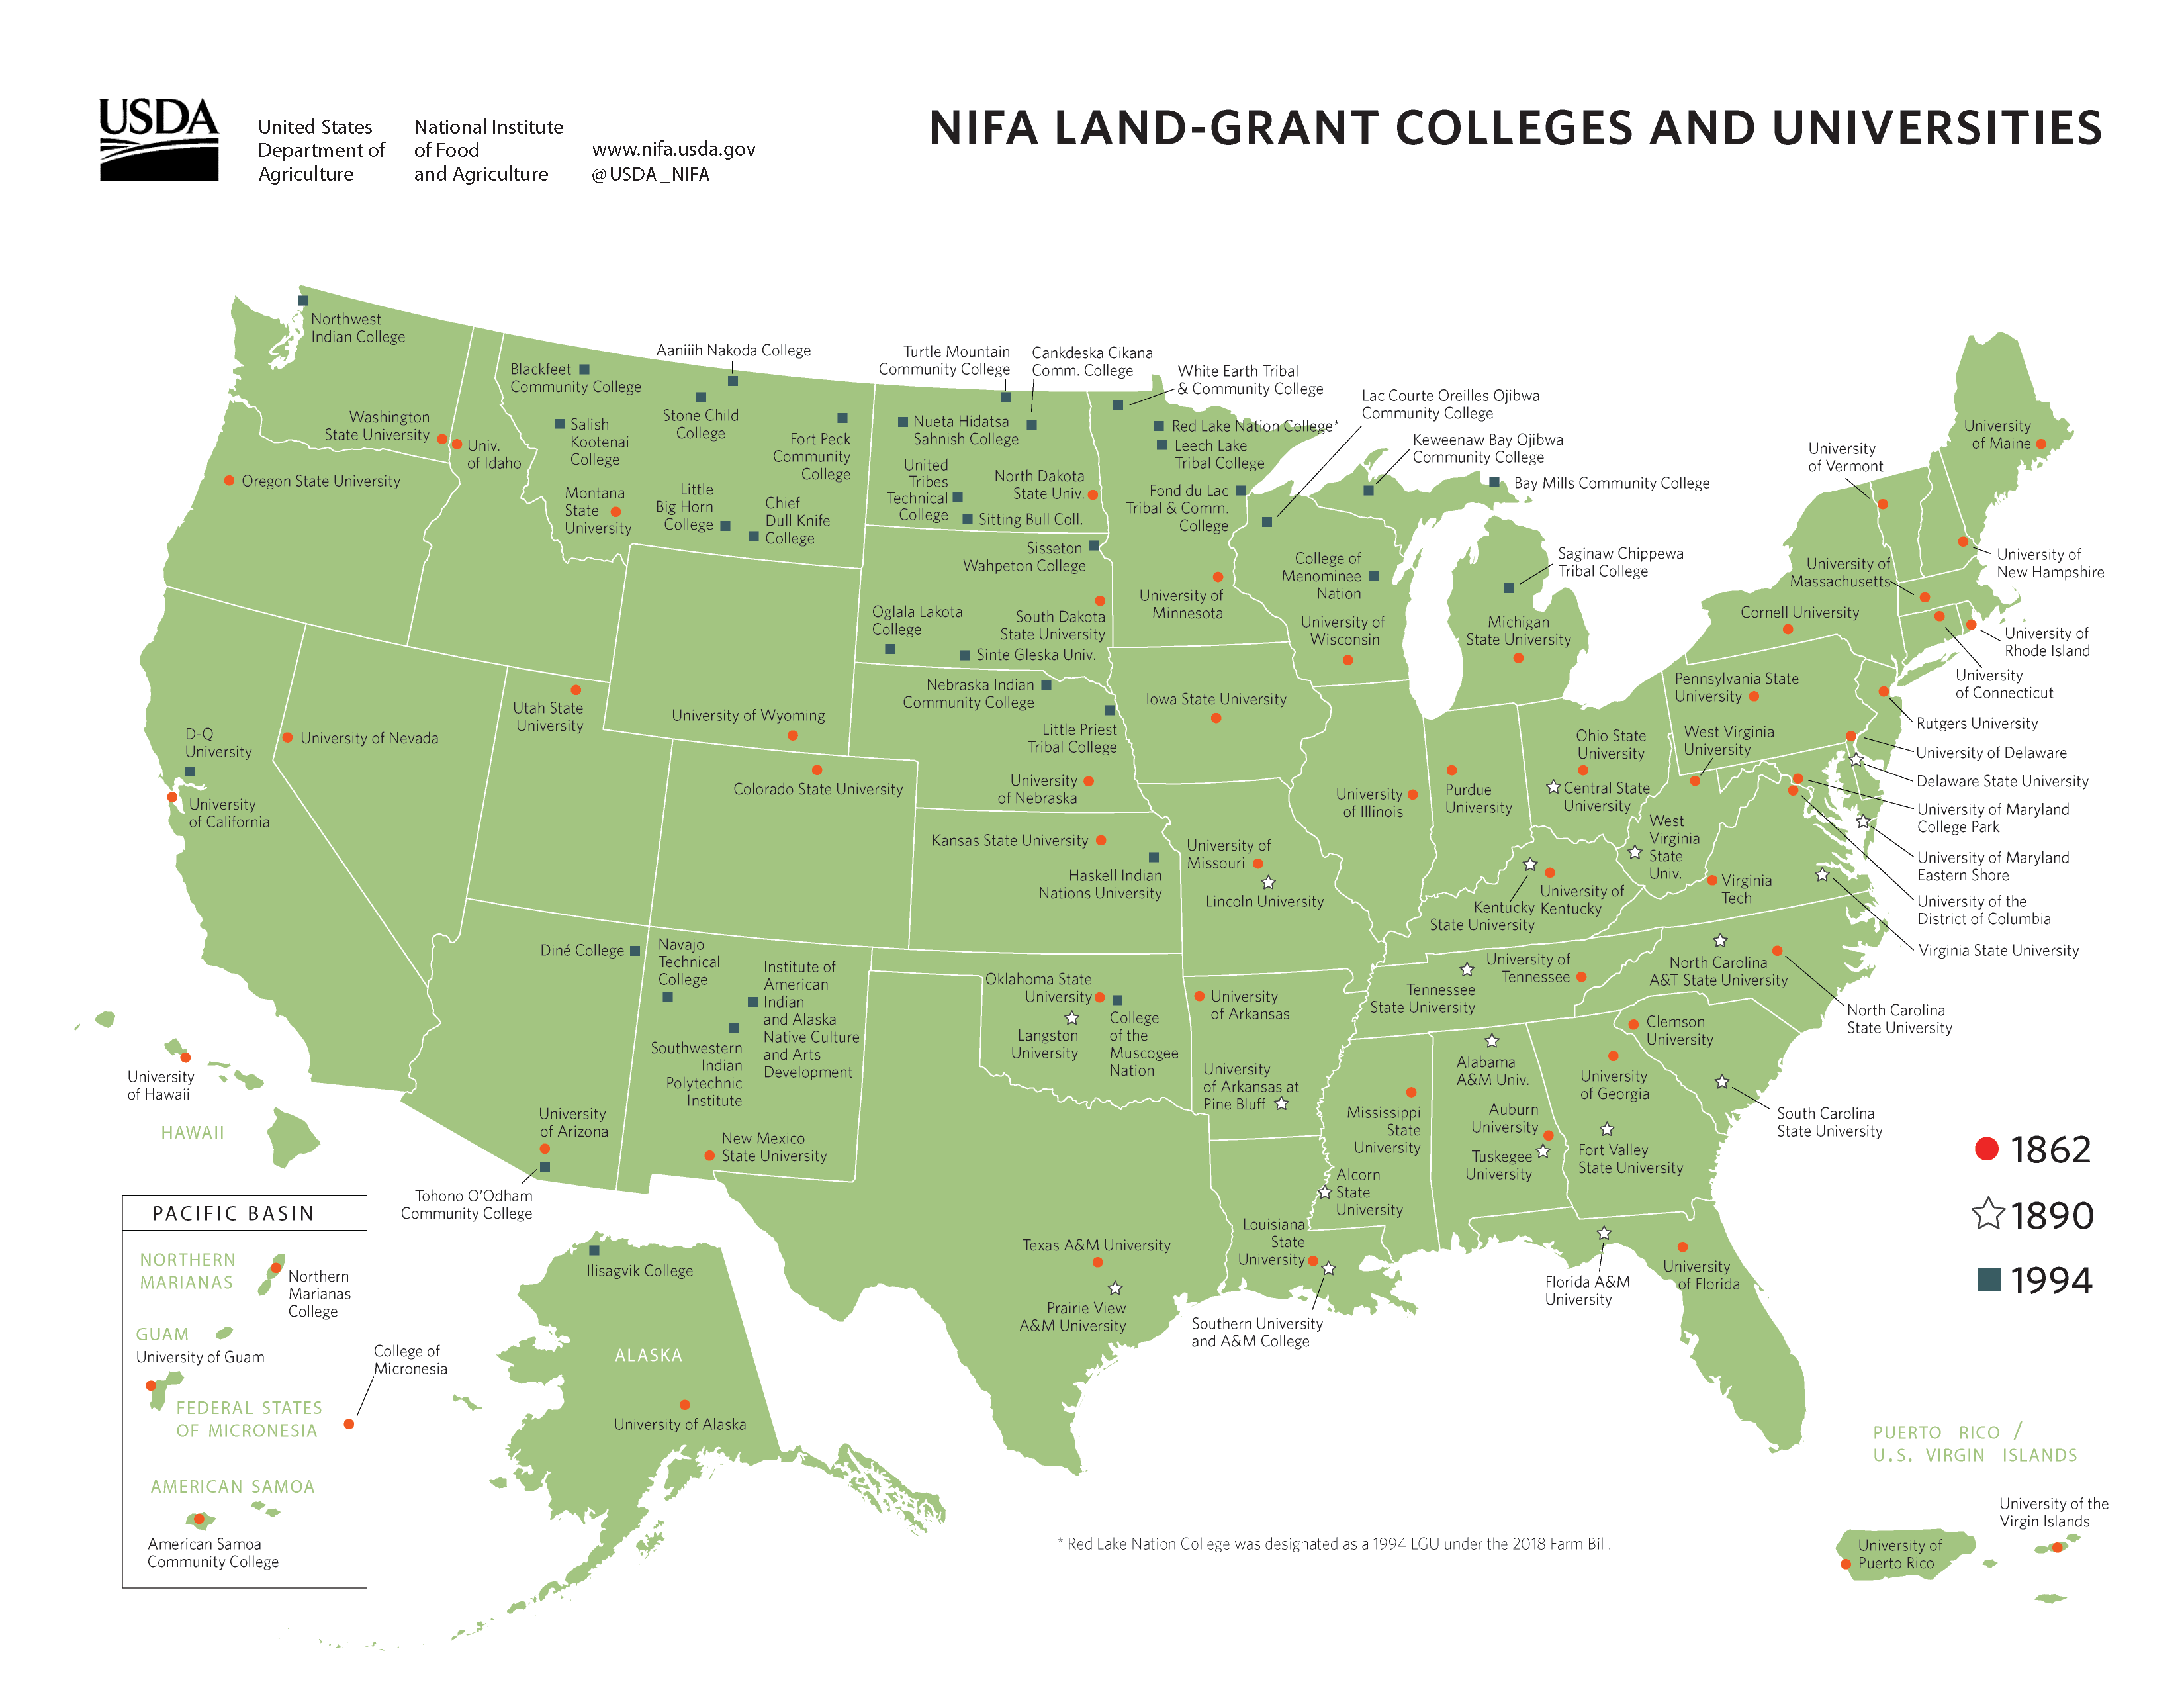 image of nifa land-grant colleges and universities map